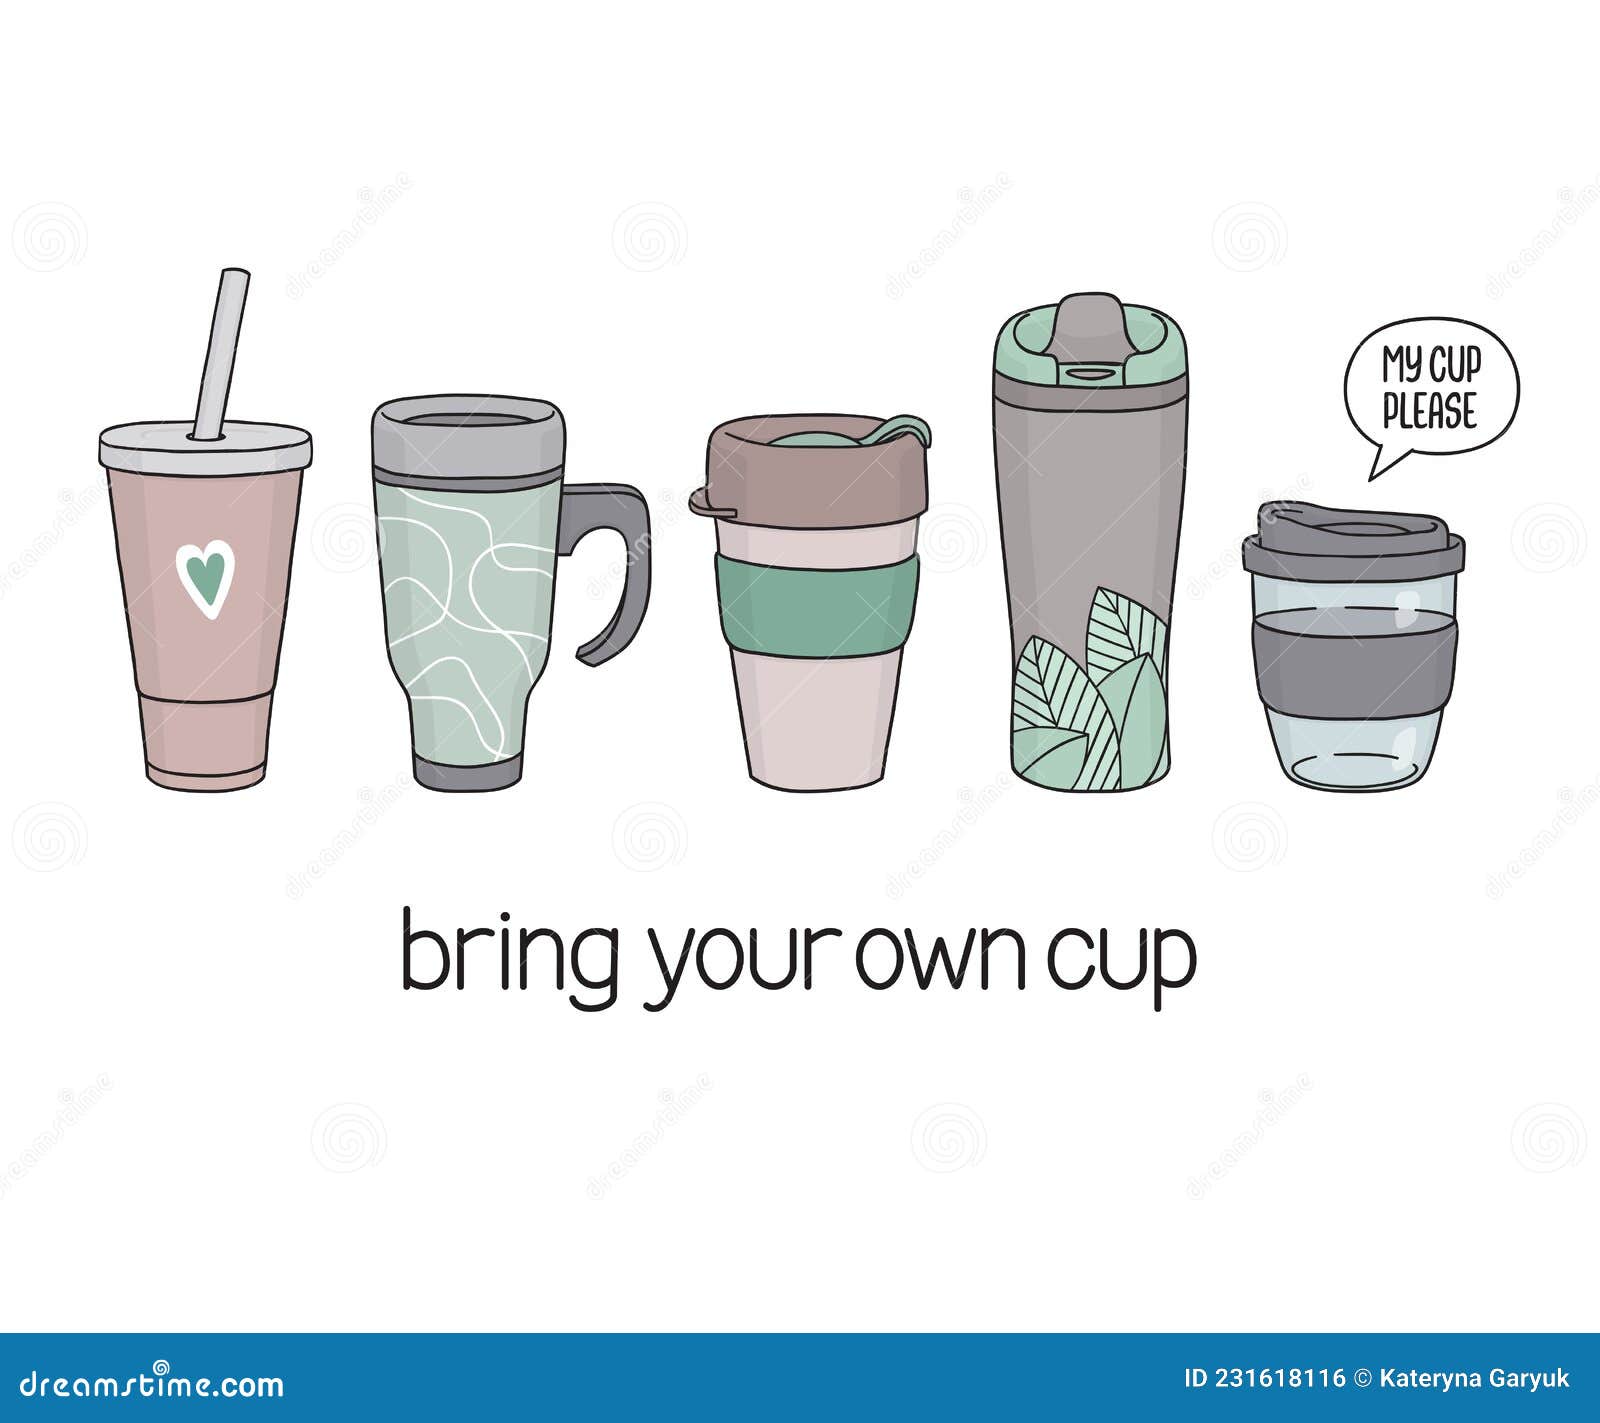 Bring your own cup stock vector. Illustration of reduce - 231618116